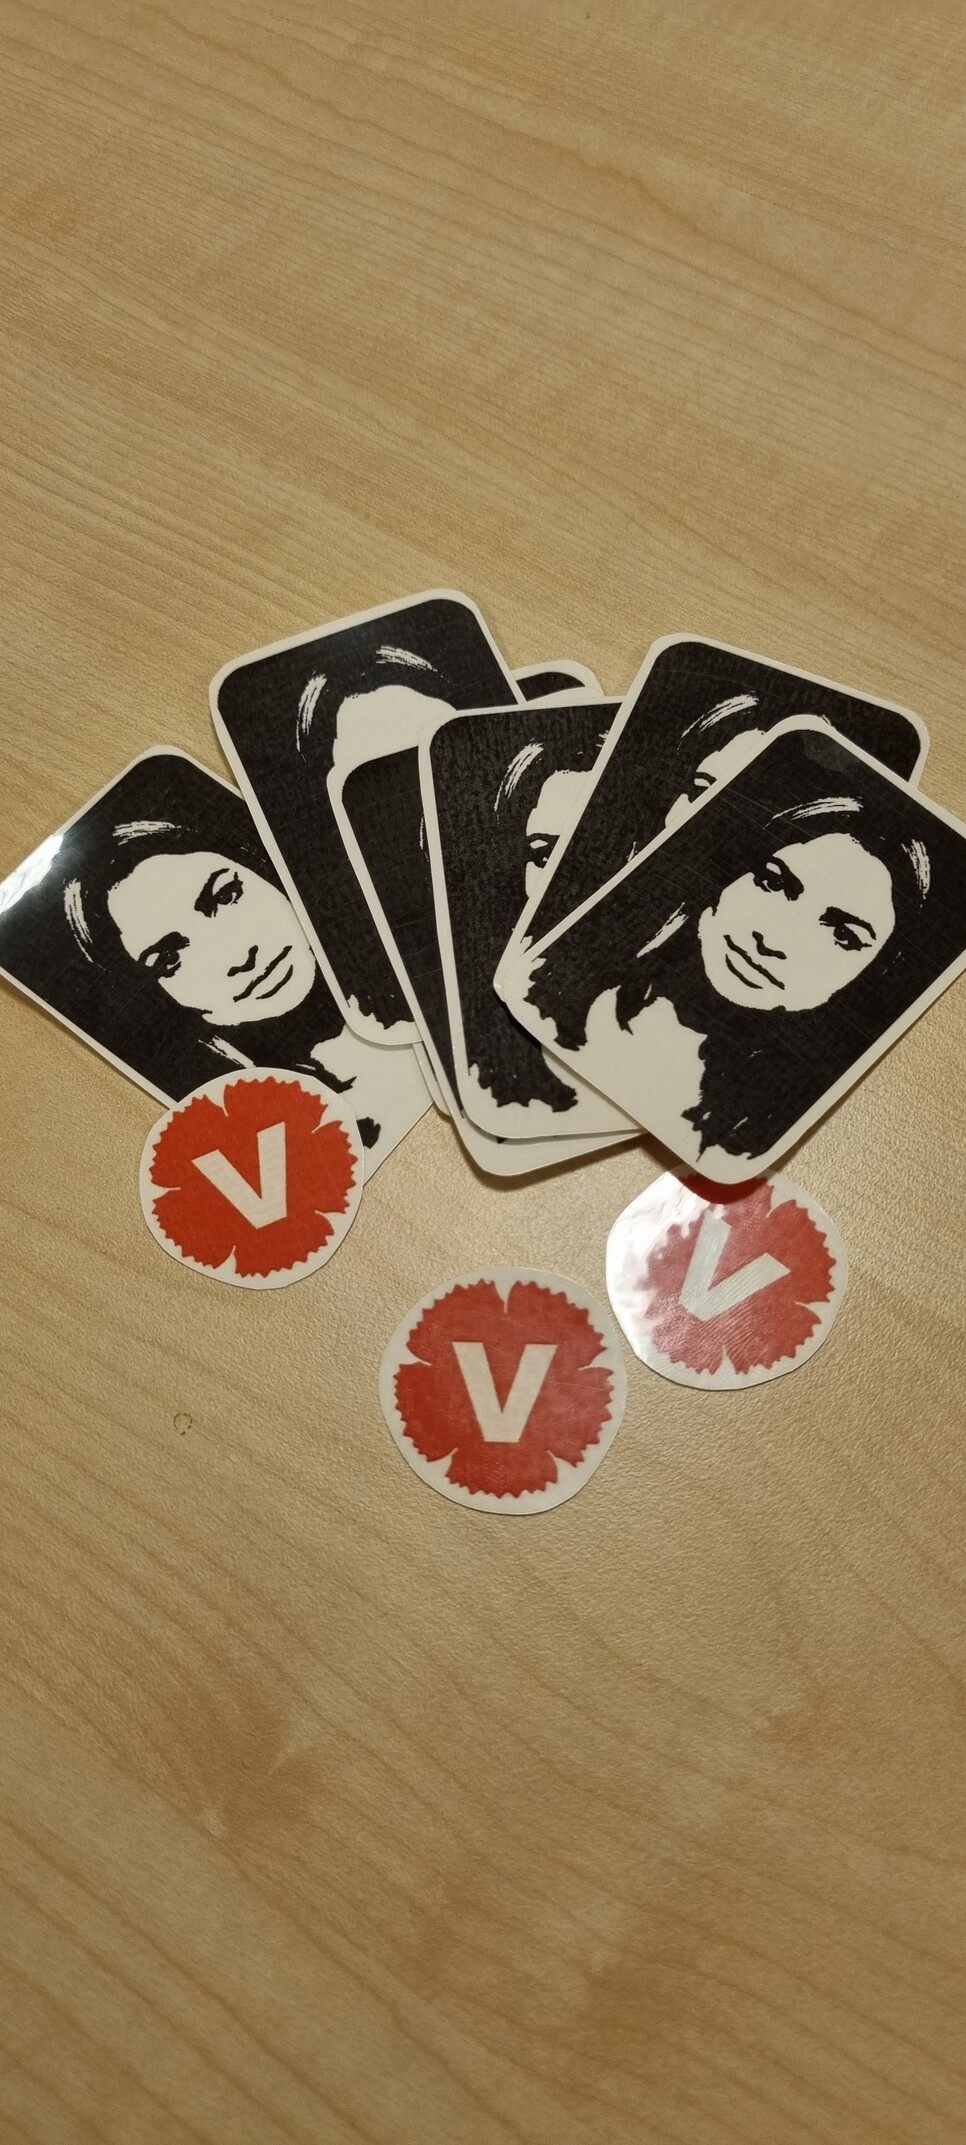 Temporary tattoos of the swedish left party leader nooshi and some party logos.